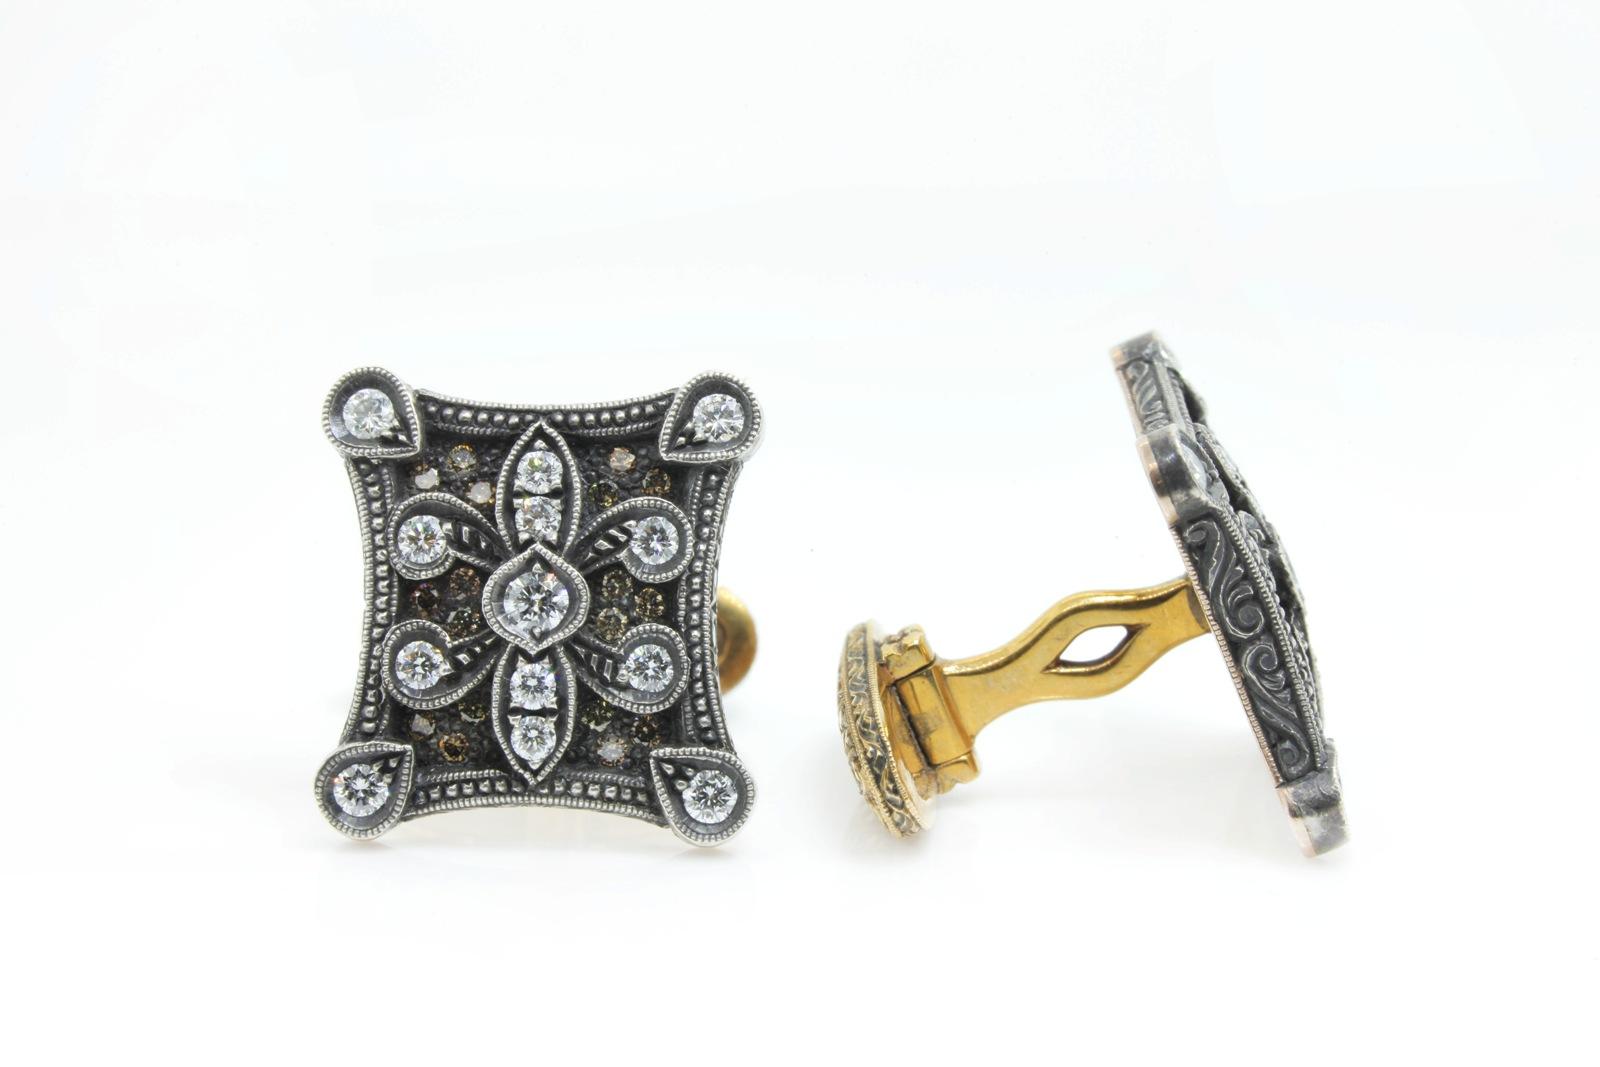 Creatively handcrafted Silver topped 18KT yellow gold Fleur-de-lis  designed cufflinks.   A 1.79 carats of white and natural brown Round Brilliant Cut Diamonds beautifully accent the cufflinks.